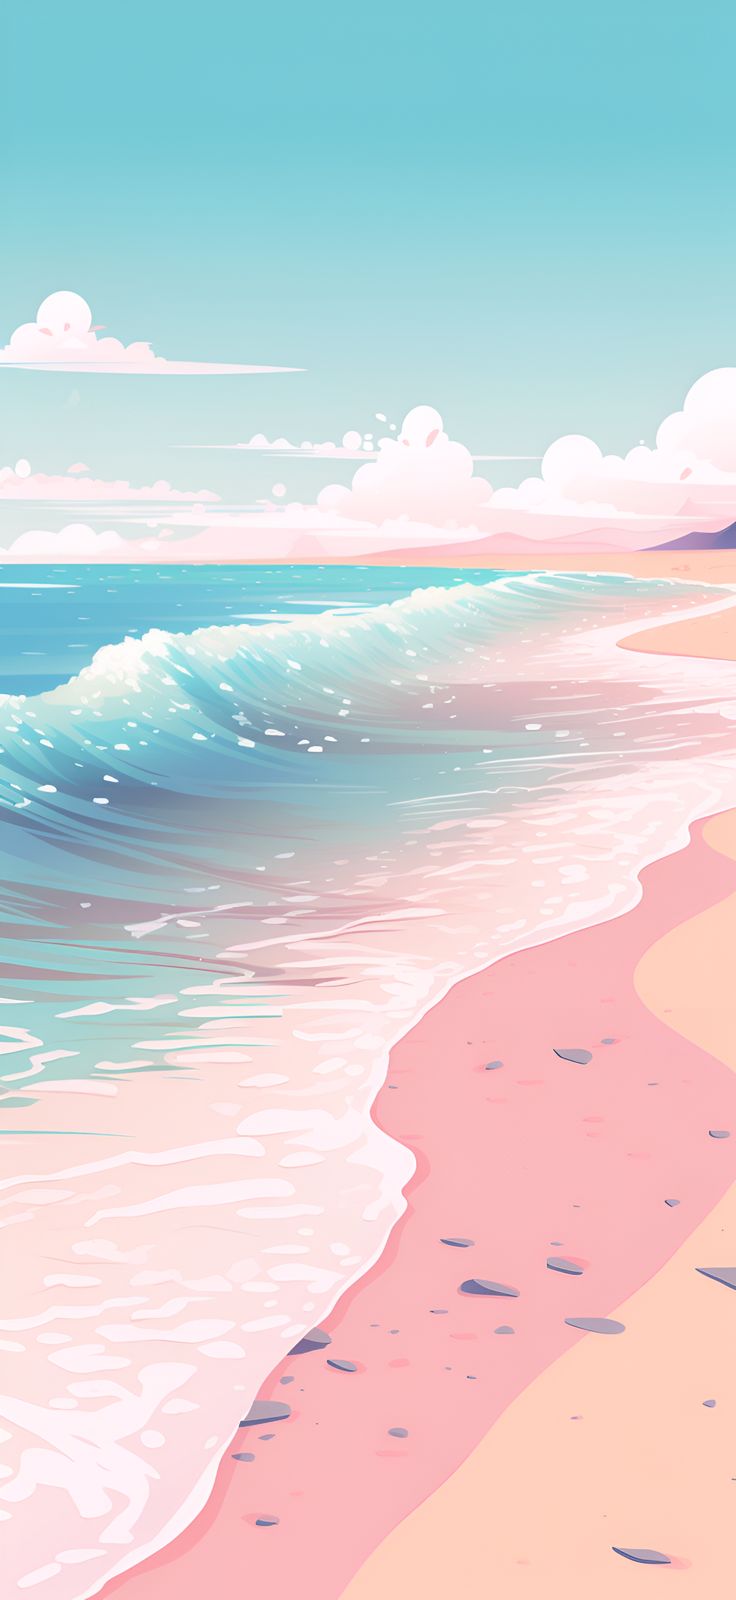 Illustration of a beach with sand, sea, waves, and sky - Android